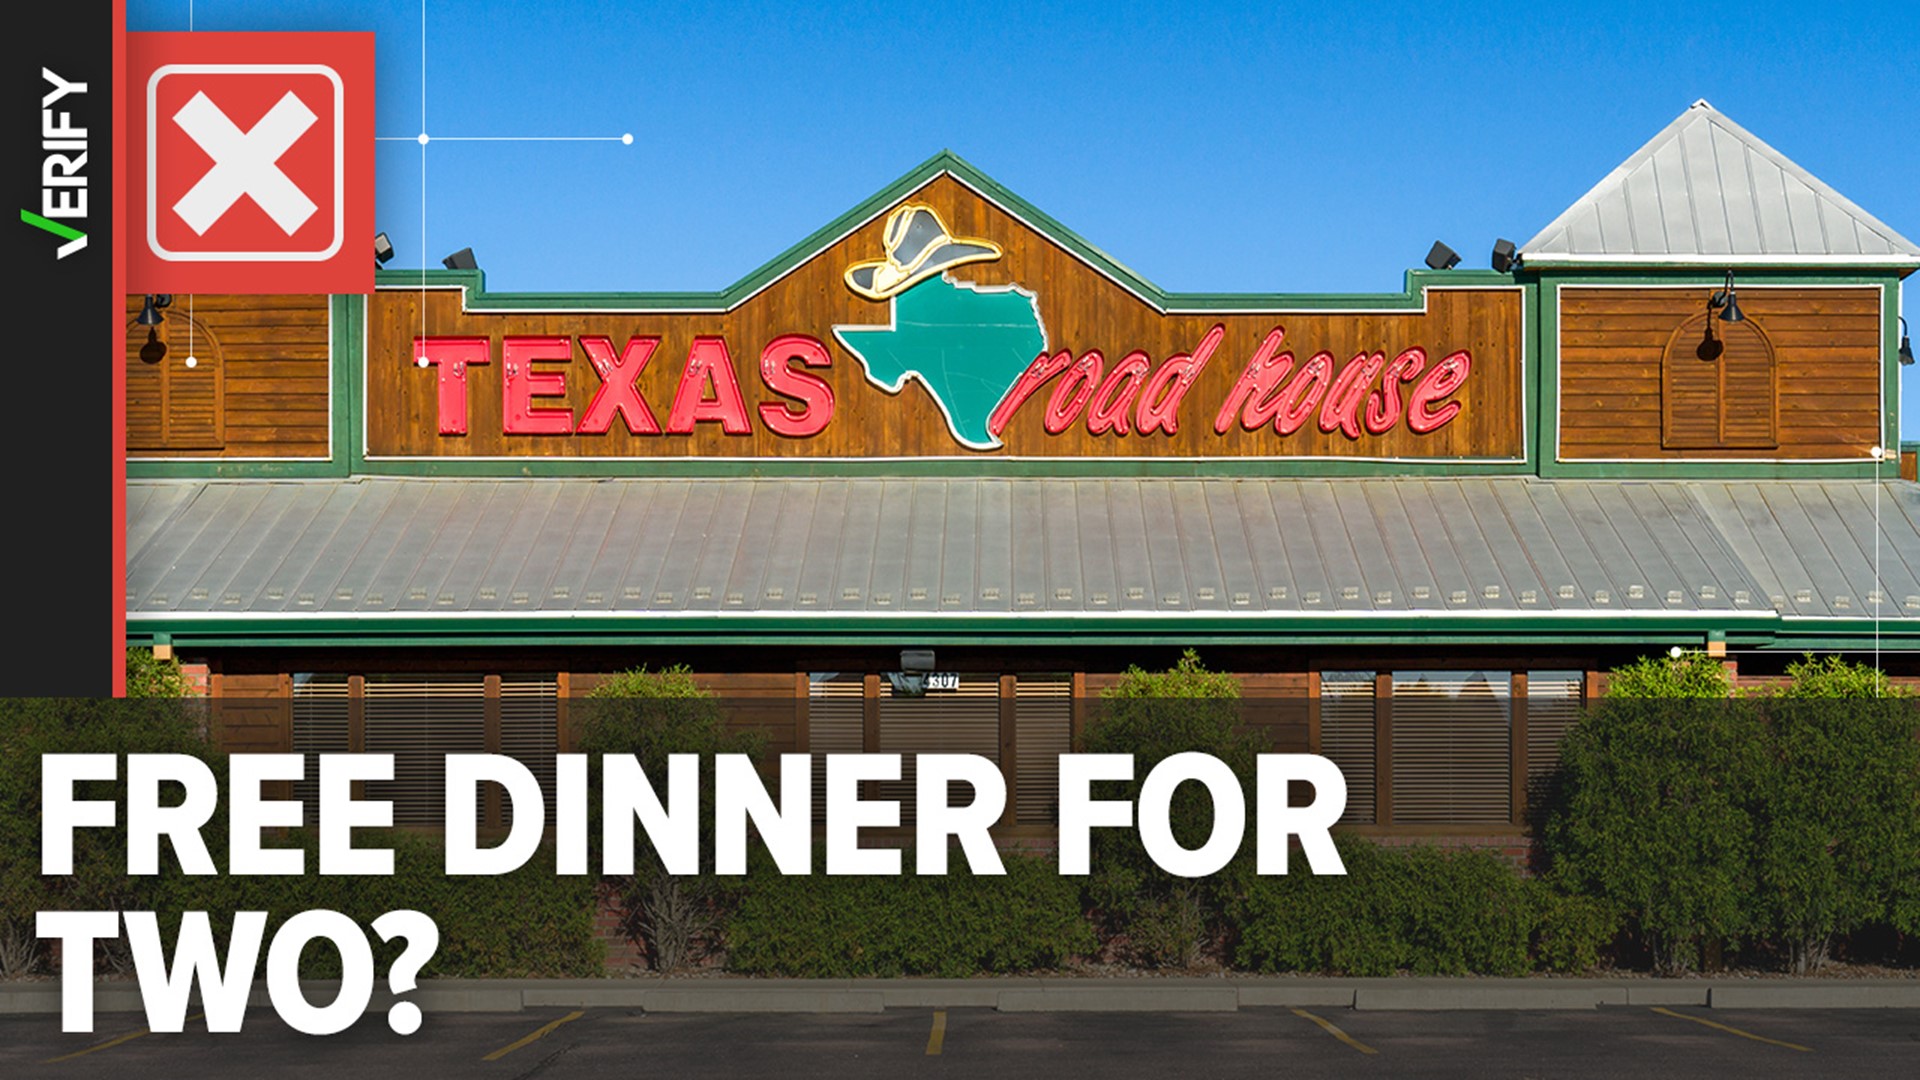 A viral post claims Texas Roadhouse is giving away a free meal for two people for anyone who comments on their post. However this is false.